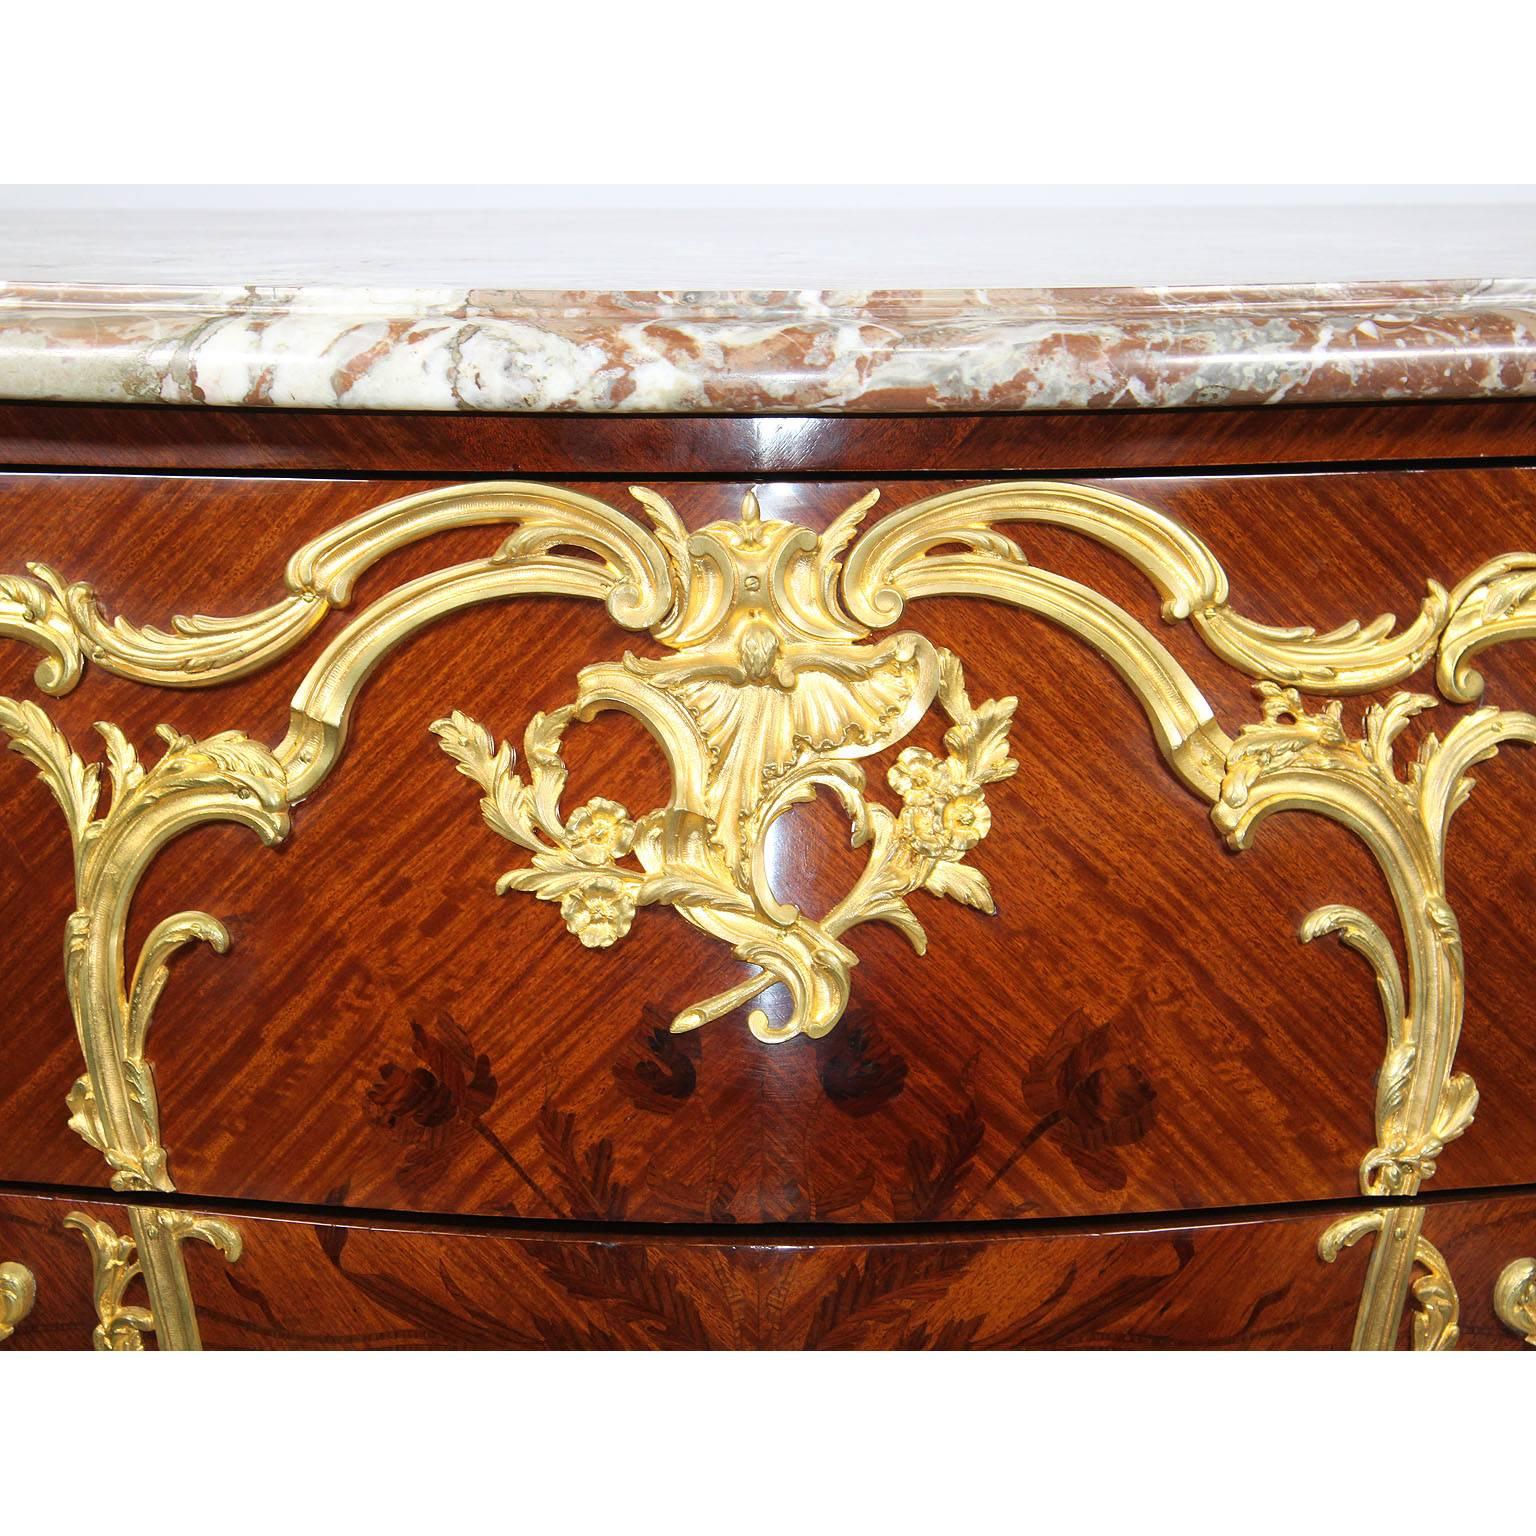 Late 19th Century French 19th-20th century Louis XV Style Gilt Bronze Mounted Marquetry Commode For Sale